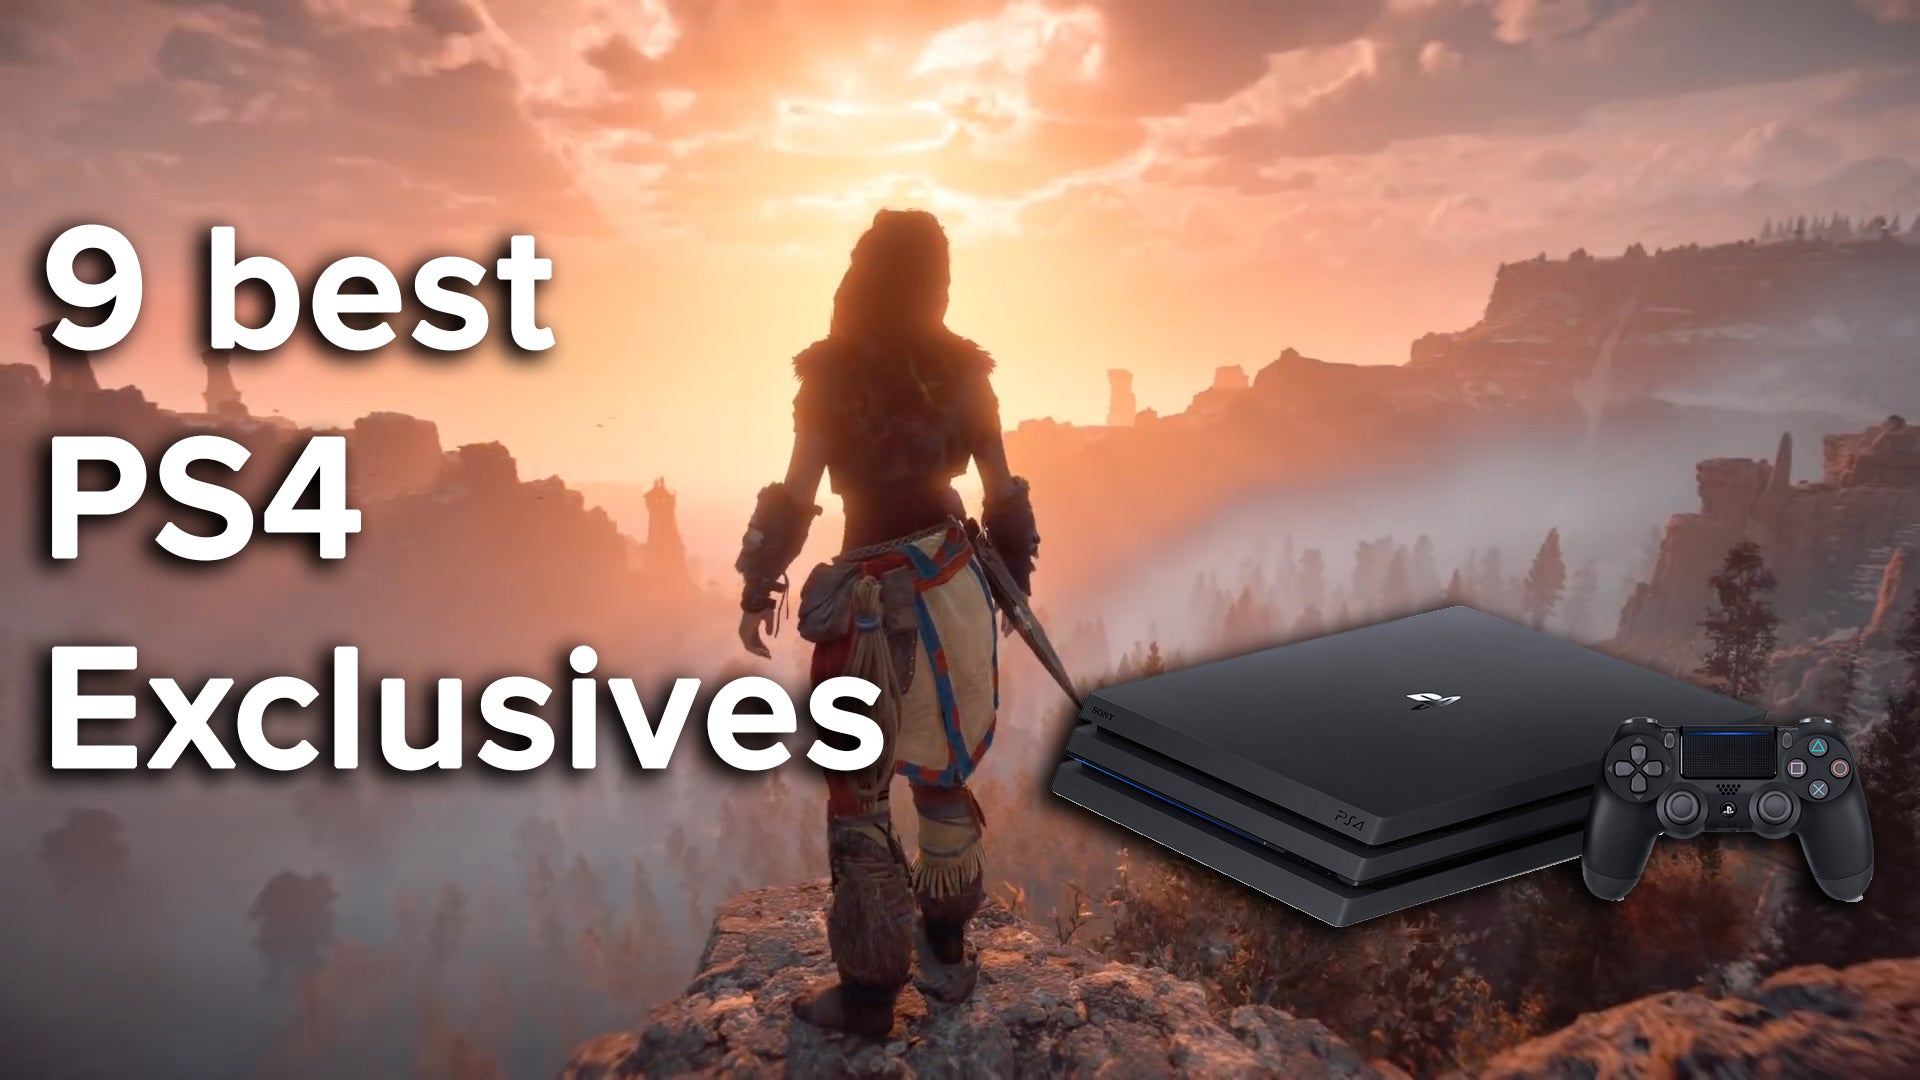 Image for The 9 best PS4 exclusives